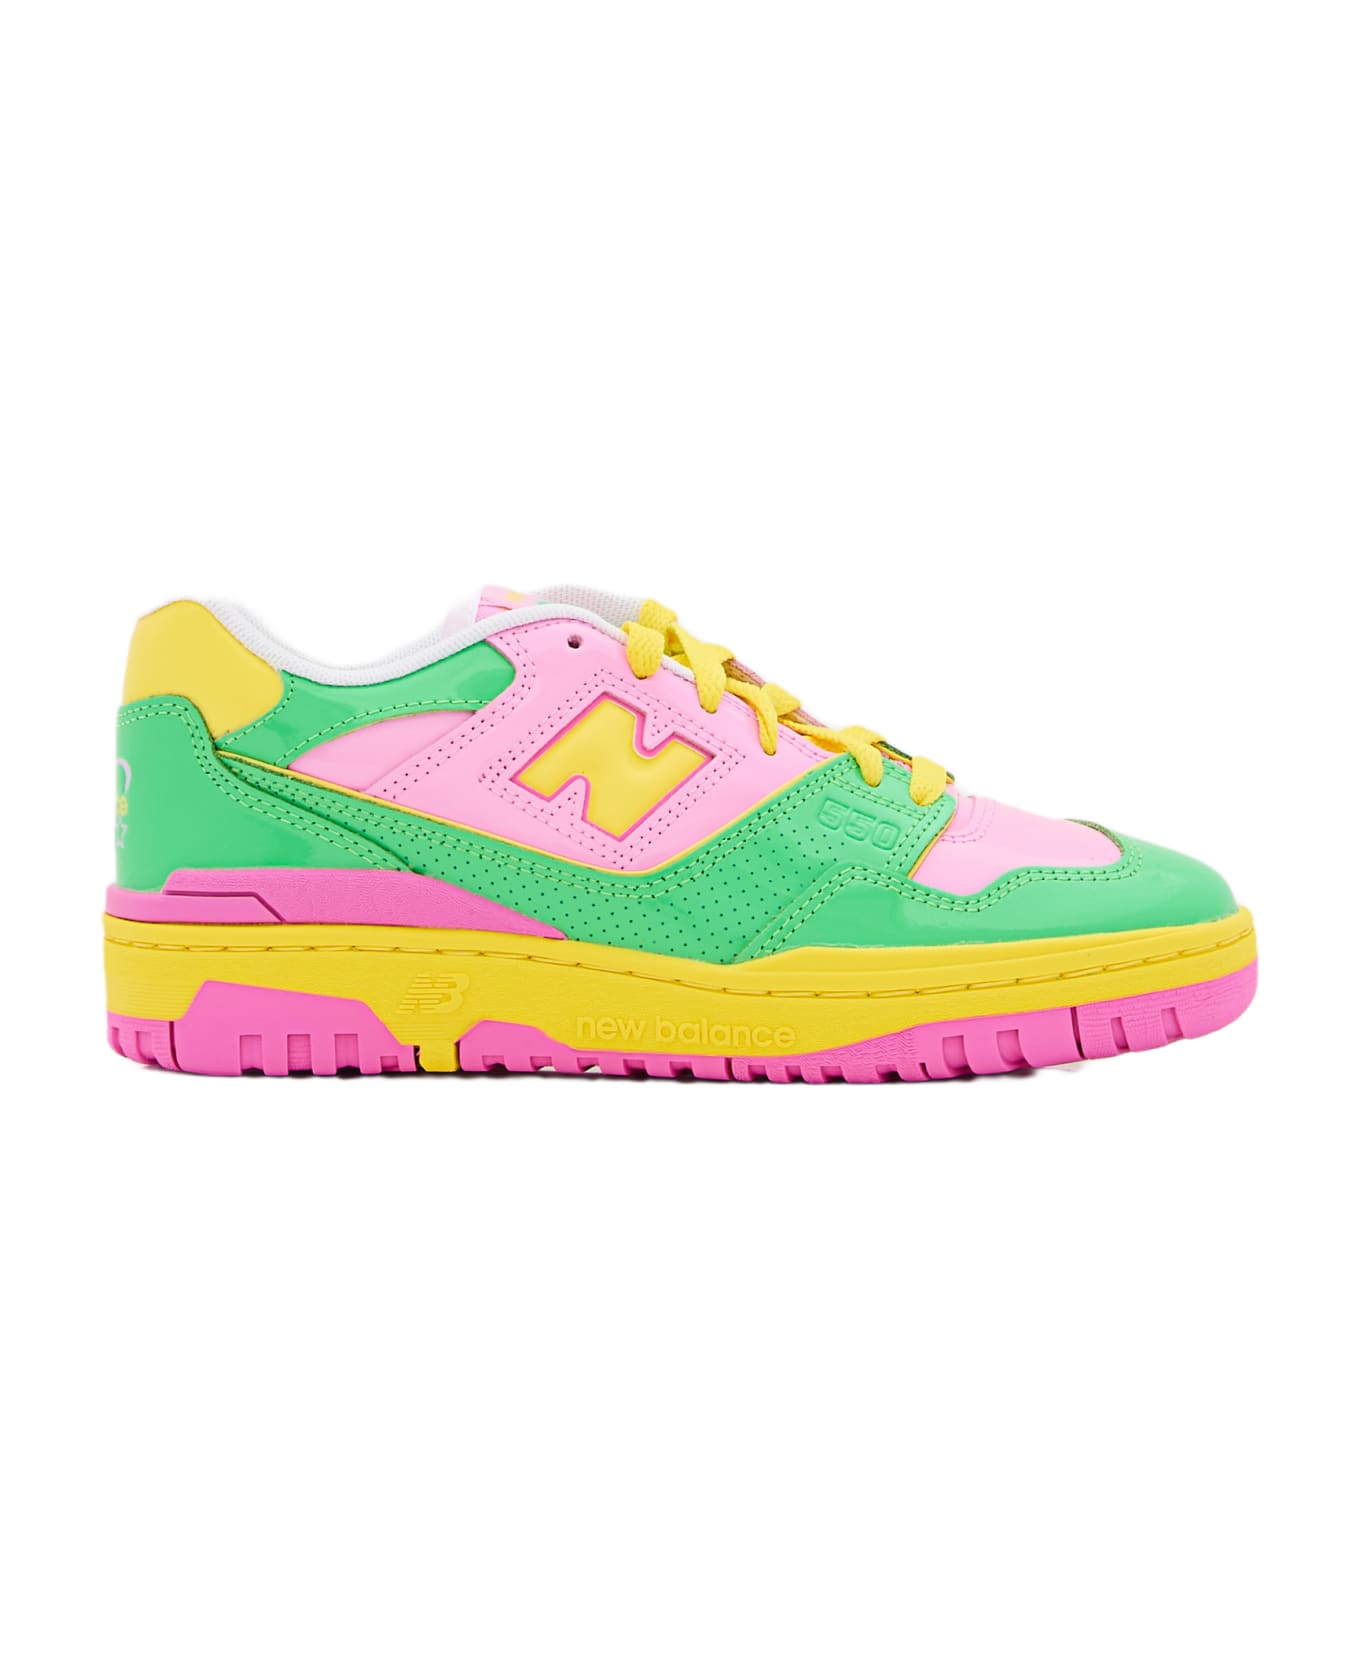 New Balance 550 Leather Sneakers - MultiColour スニーカー